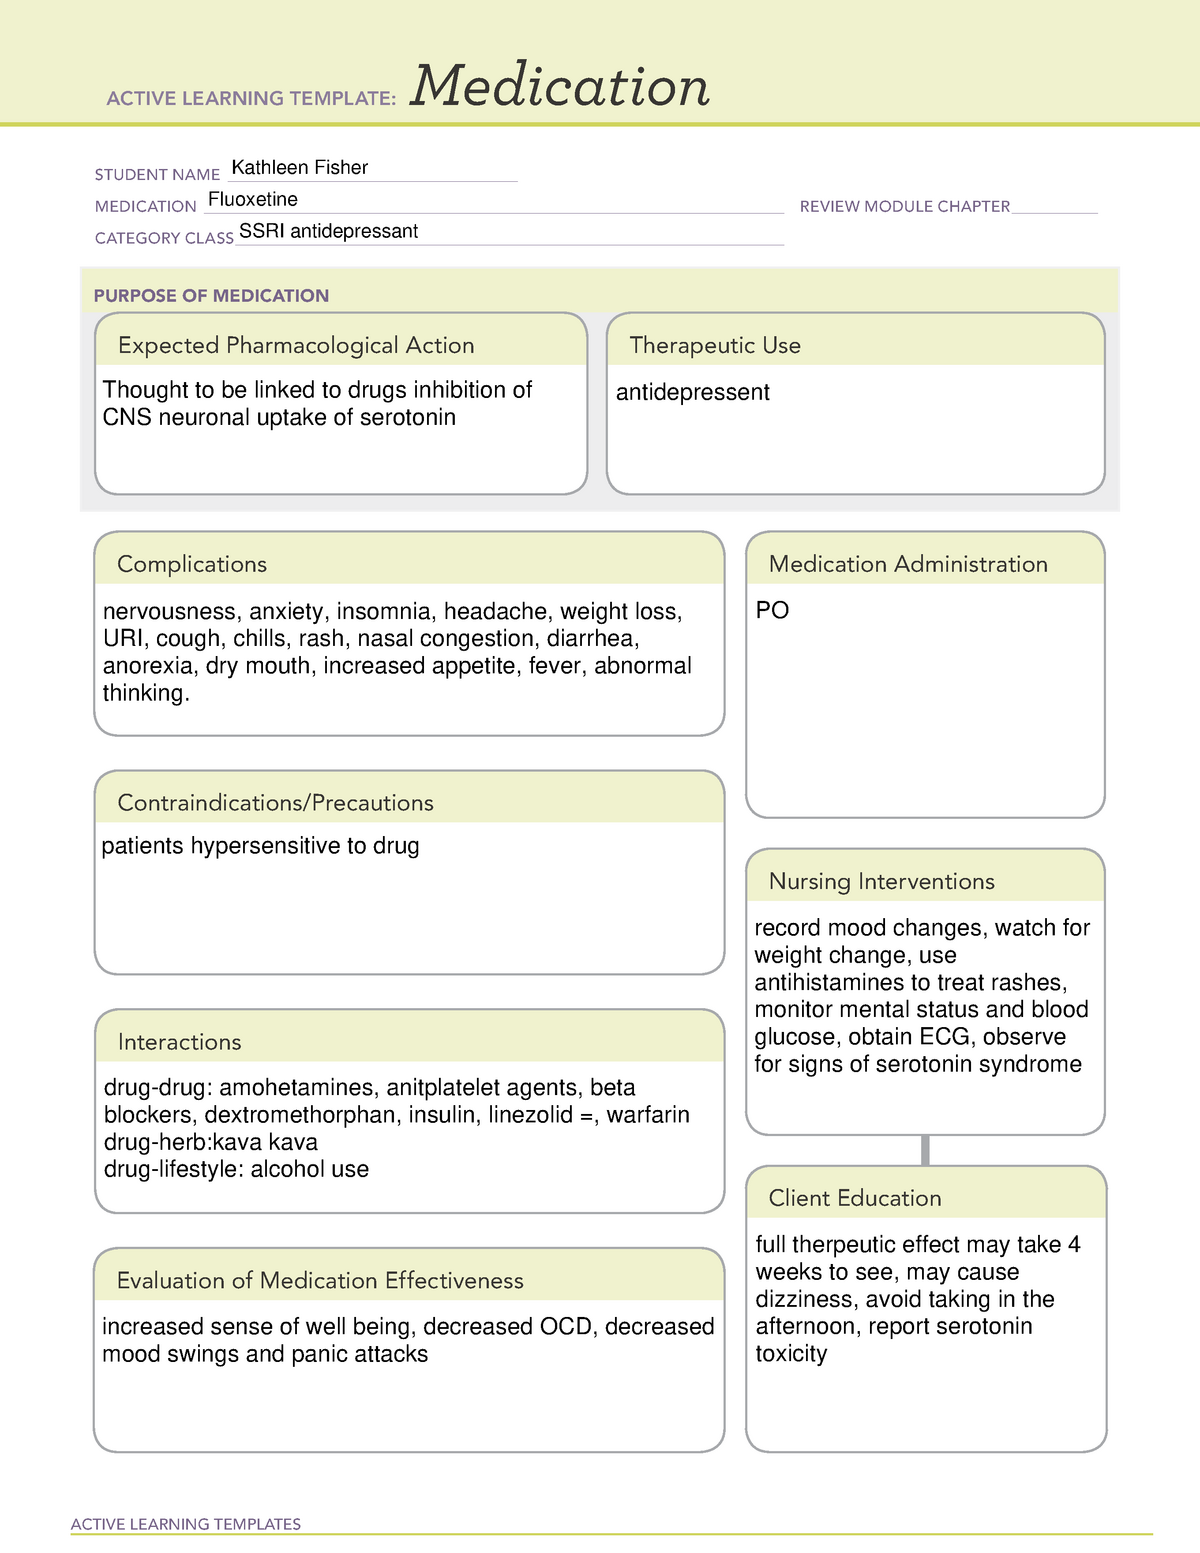 Medtemp fluoxetine ATI template ACTIVE LEARNING TEMPLATES